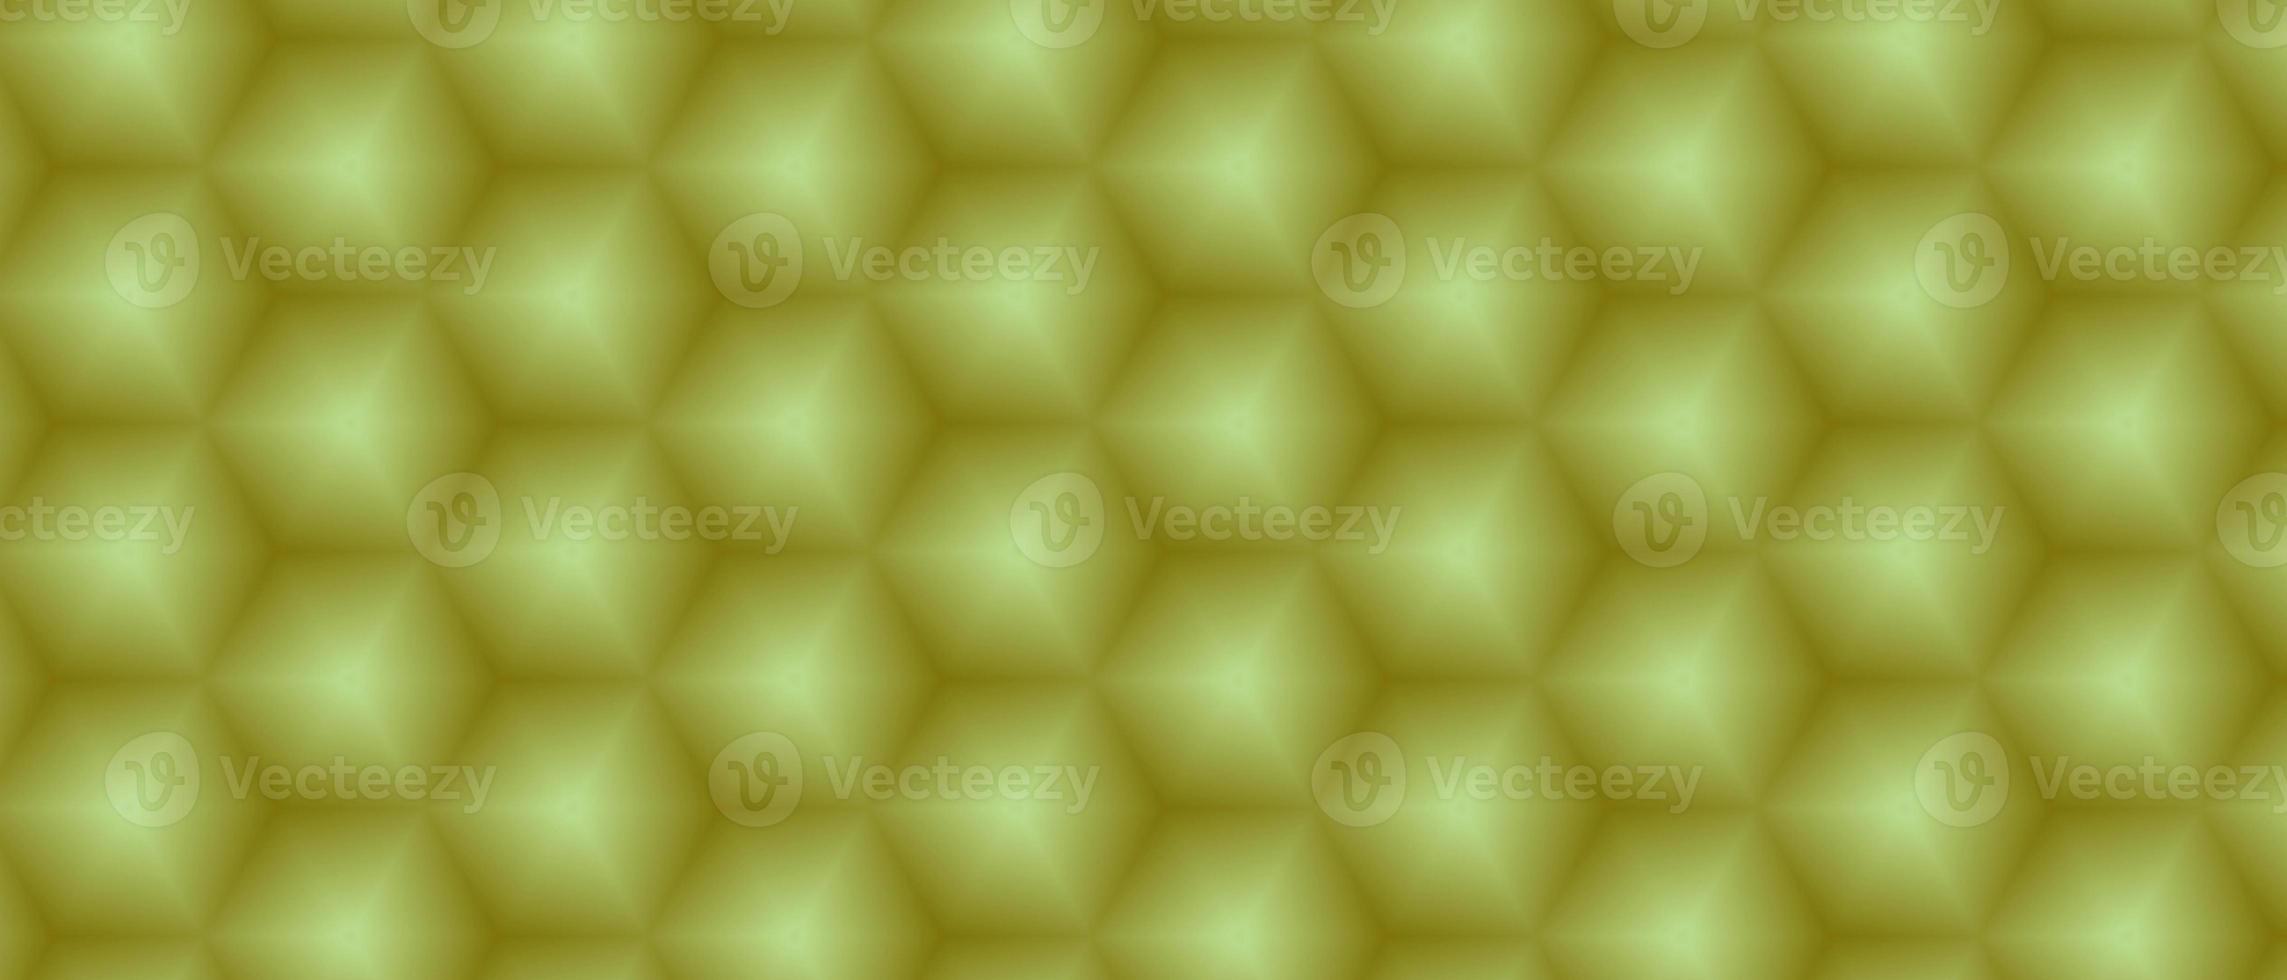 A green honeycomb background that tiles seamlessly as a pattern. - Honey